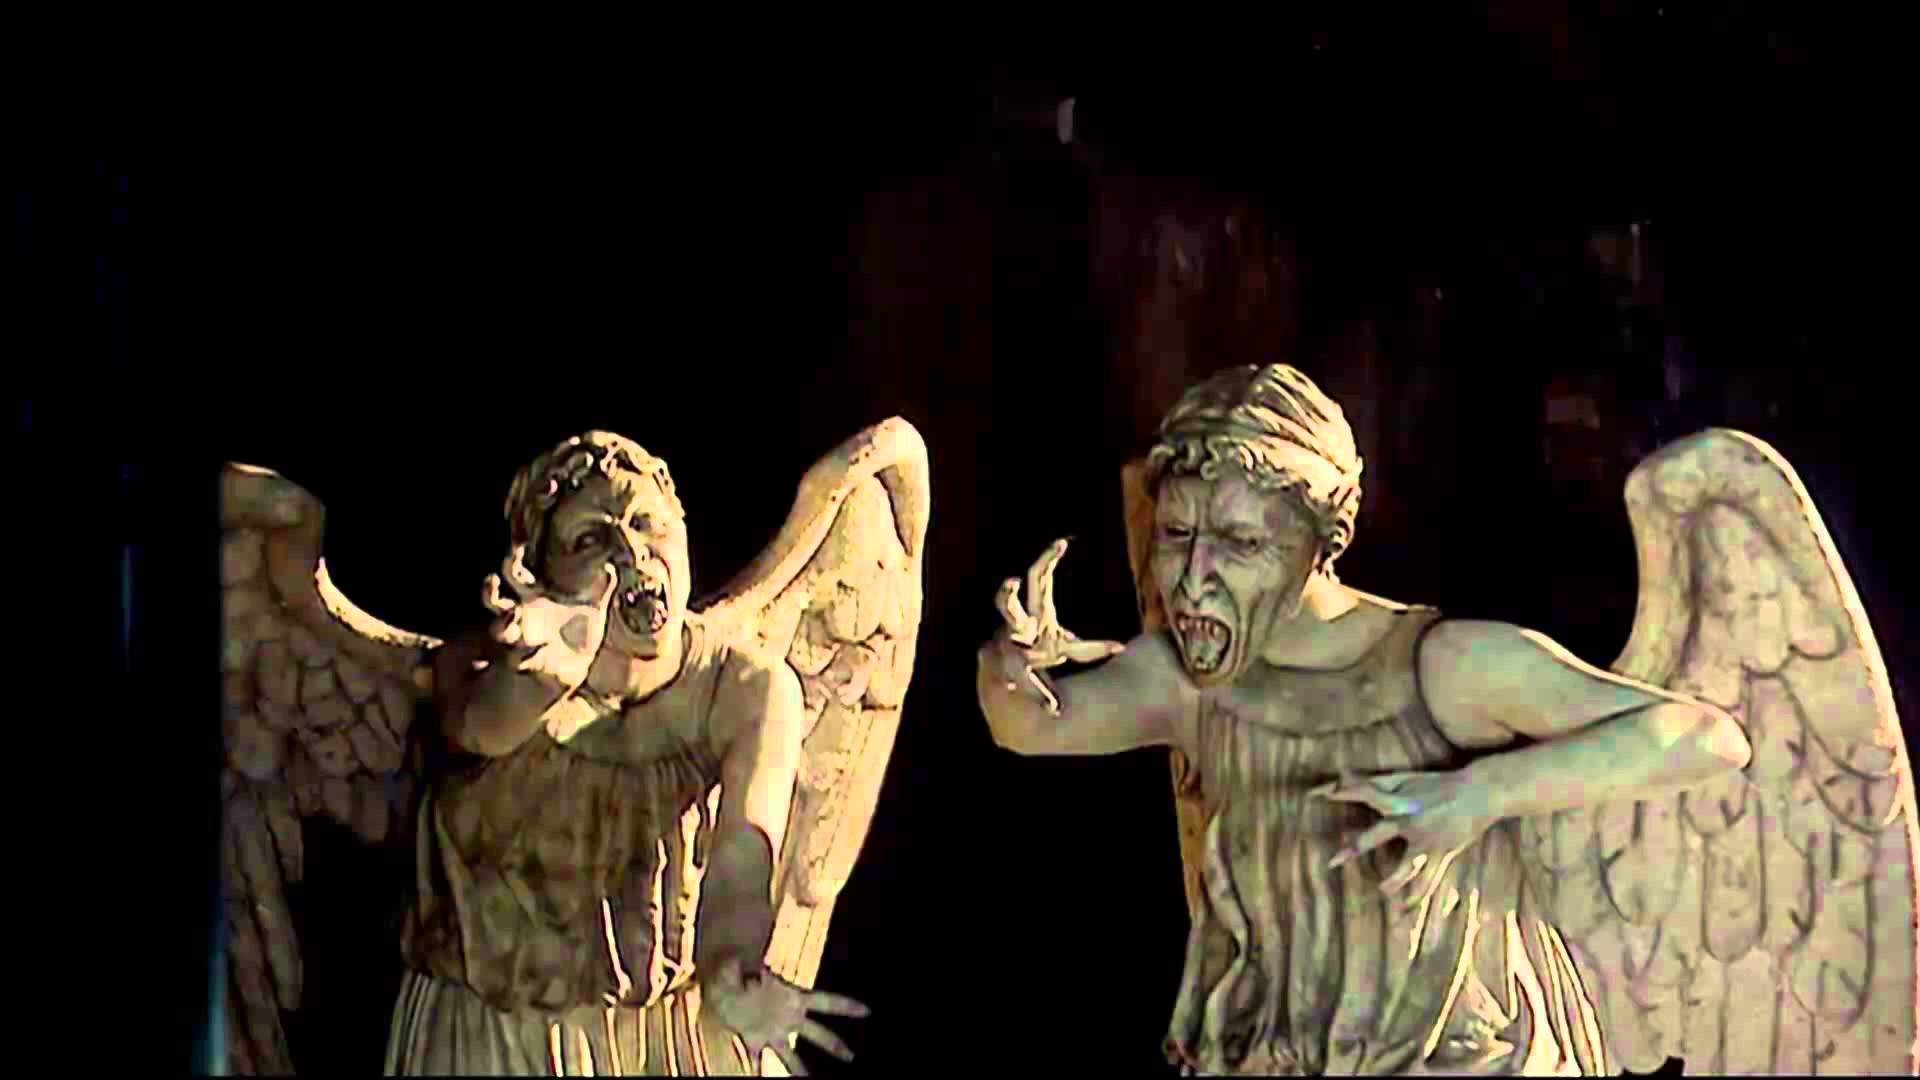 Doctor Who Weeping Angels Screensaver - Doctor Who Weeping Angels Moving Gif - HD Wallpaper 